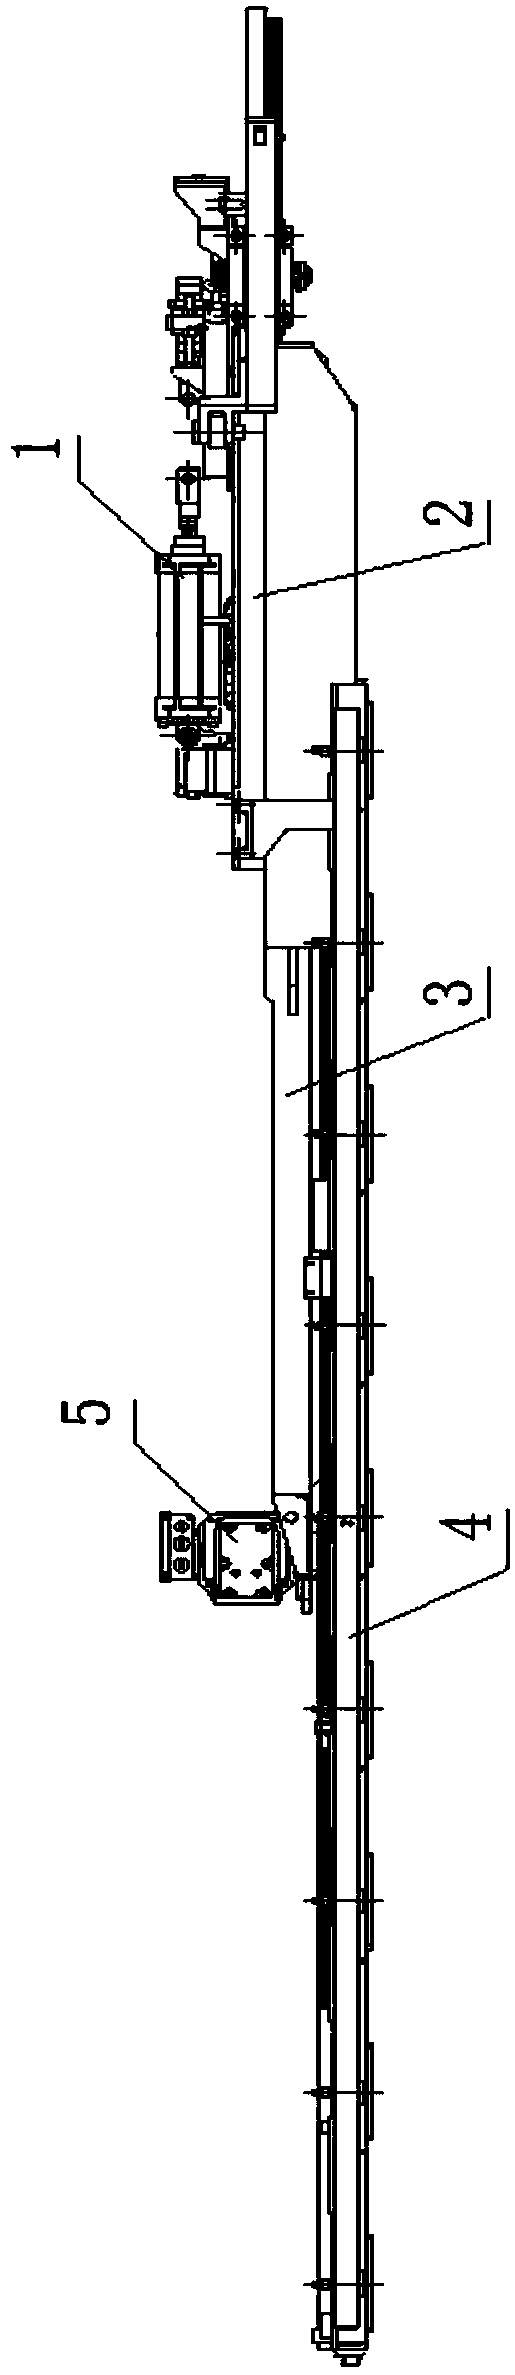 Material vehicle automatic transfer mechanism